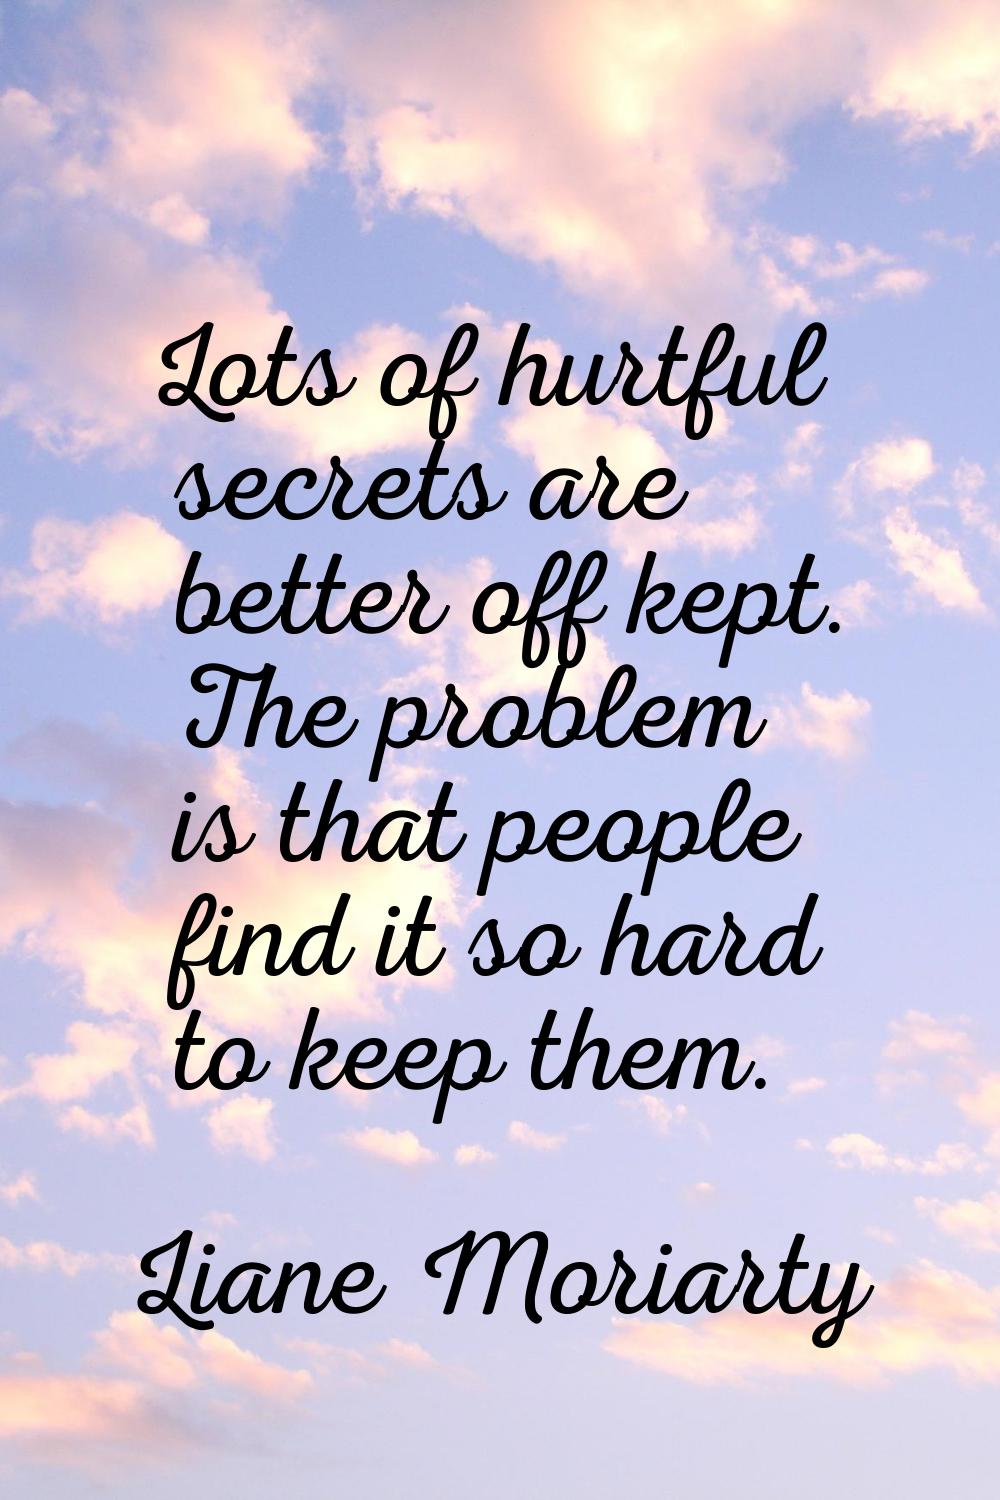 Lots of hurtful secrets are better off kept. The problem is that people find it so hard to keep the